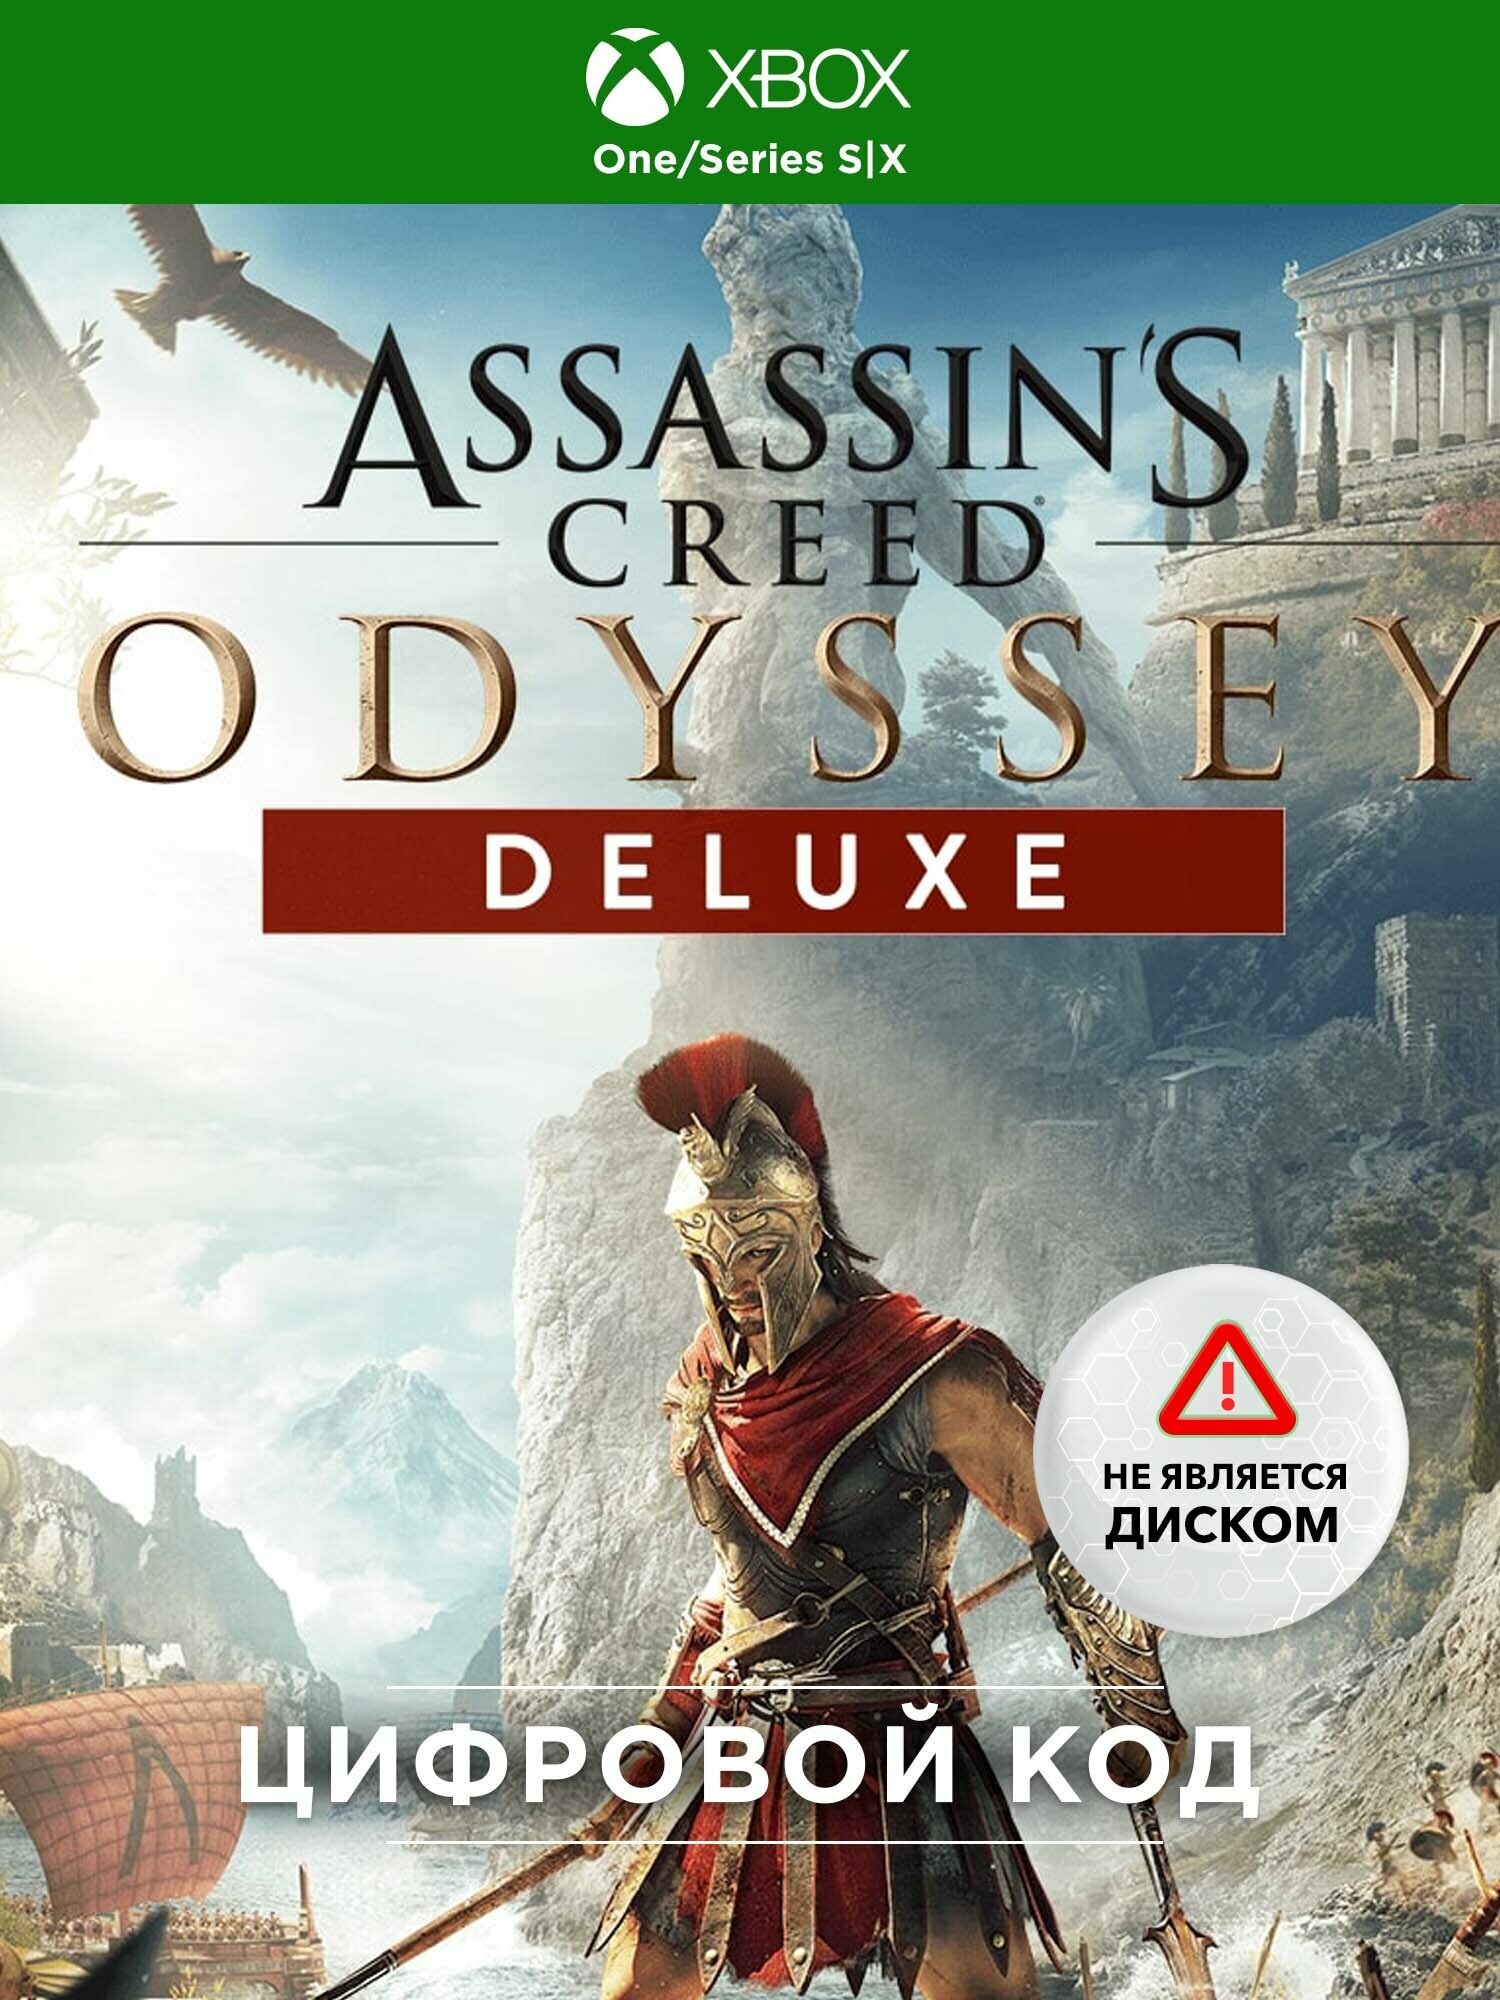 Assassin's Creed® Odyssey - DELUXE EDITION, xbox